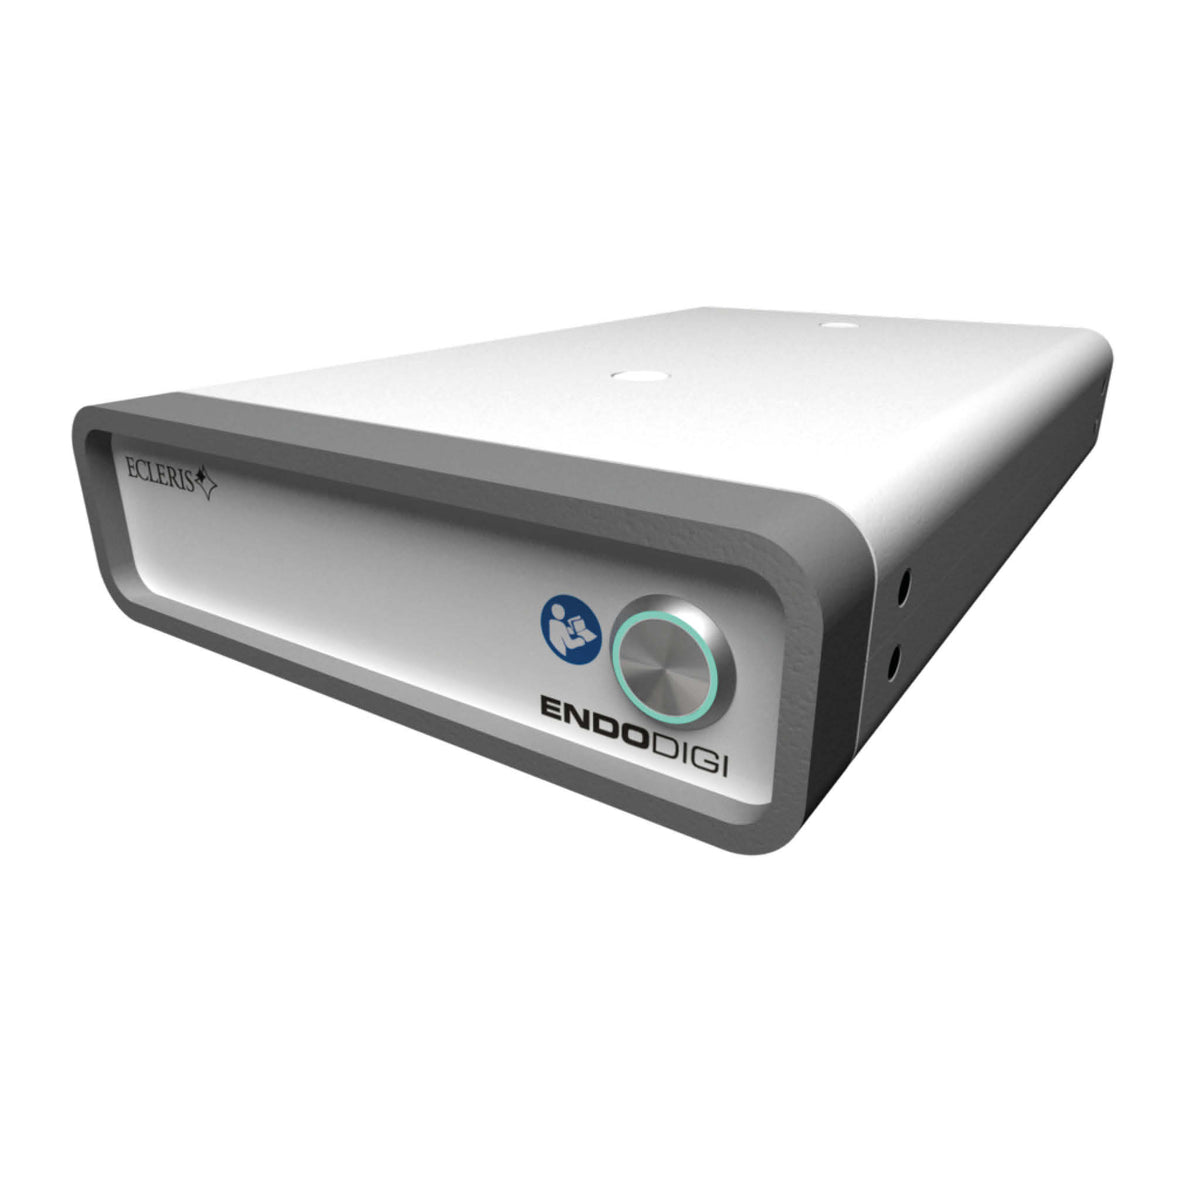 Ecleris EndoDigi Capturing System enables high resolution image capture along with live video and audio recording.